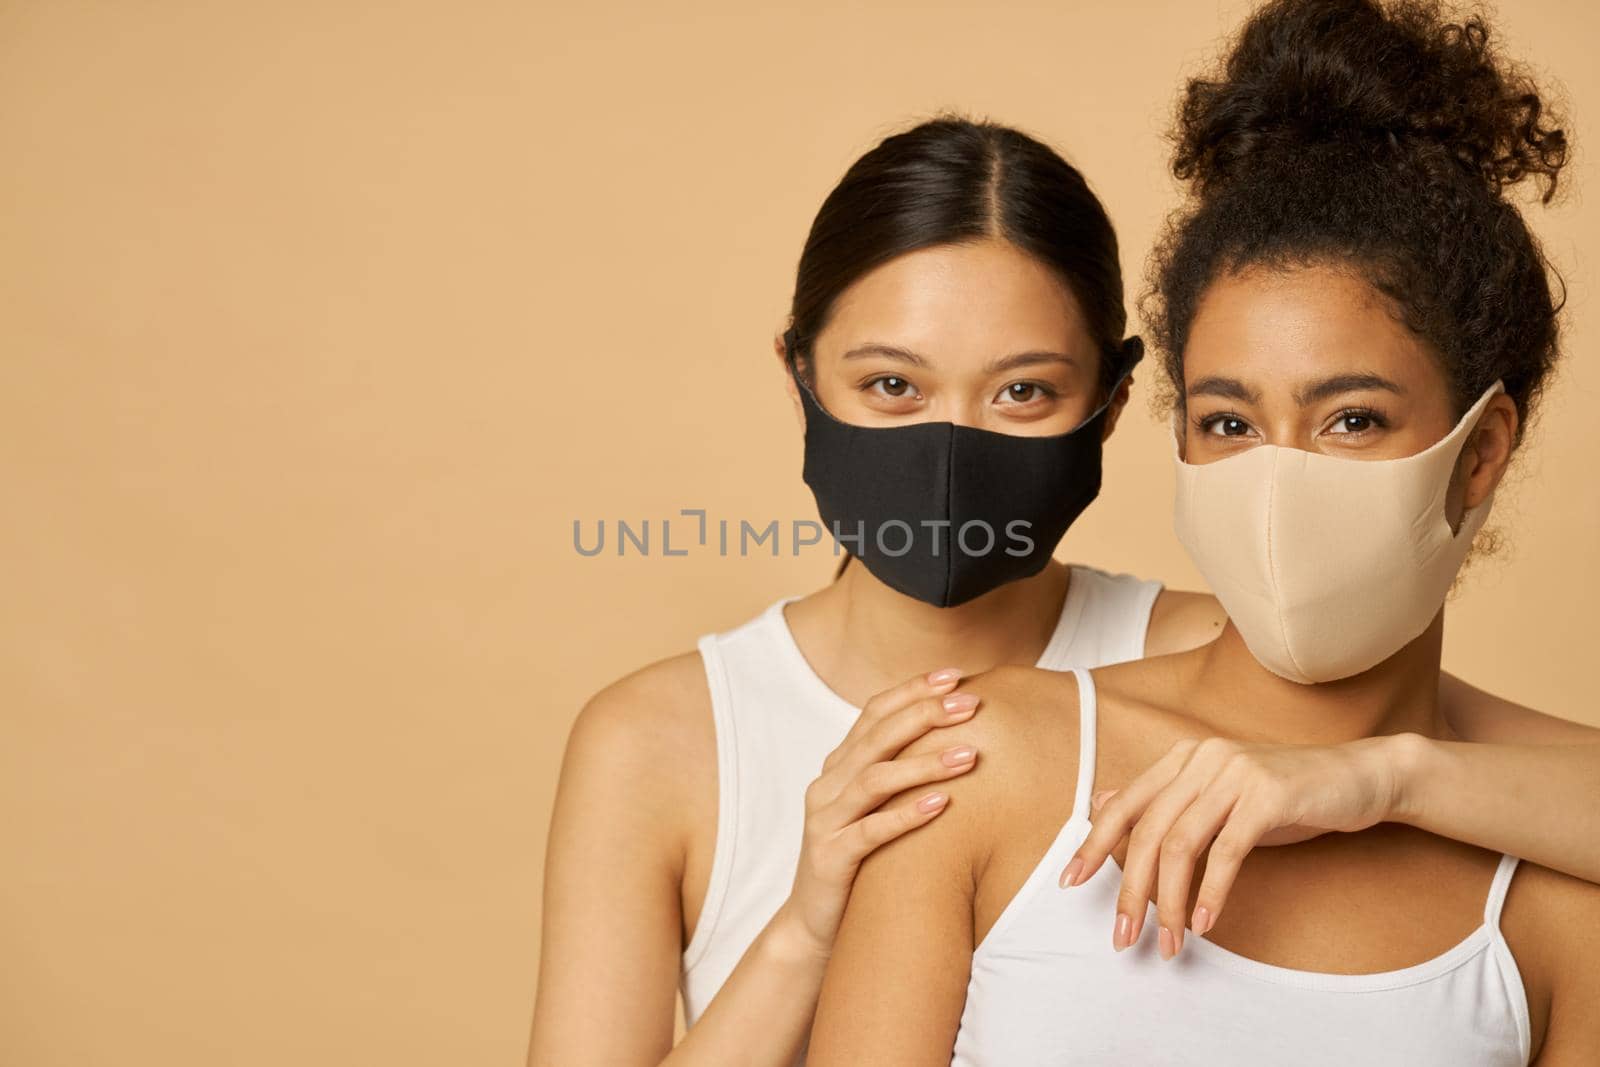 Portrait of two beautiful young diverse women wearing protective facial masks looking at camera while posing together isolated over beige background. Safety, pandemic concept